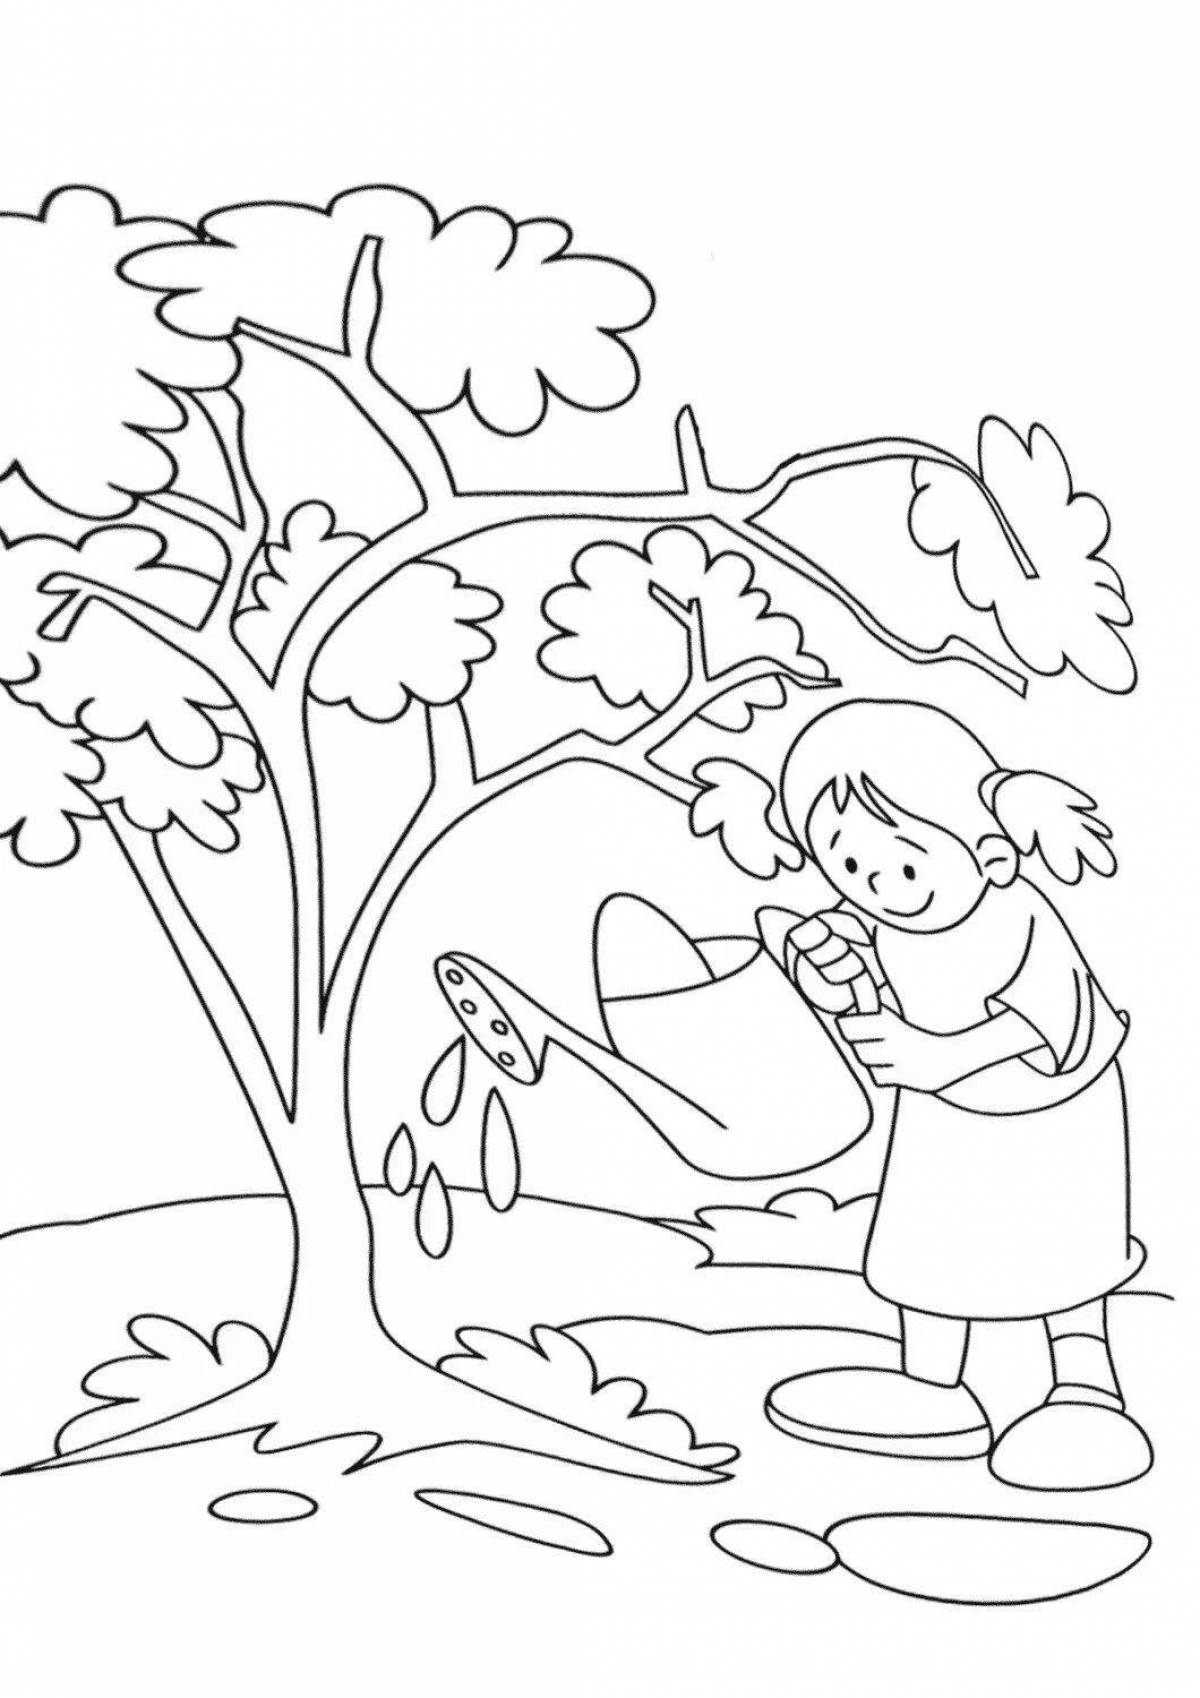 Environment protection coloring page